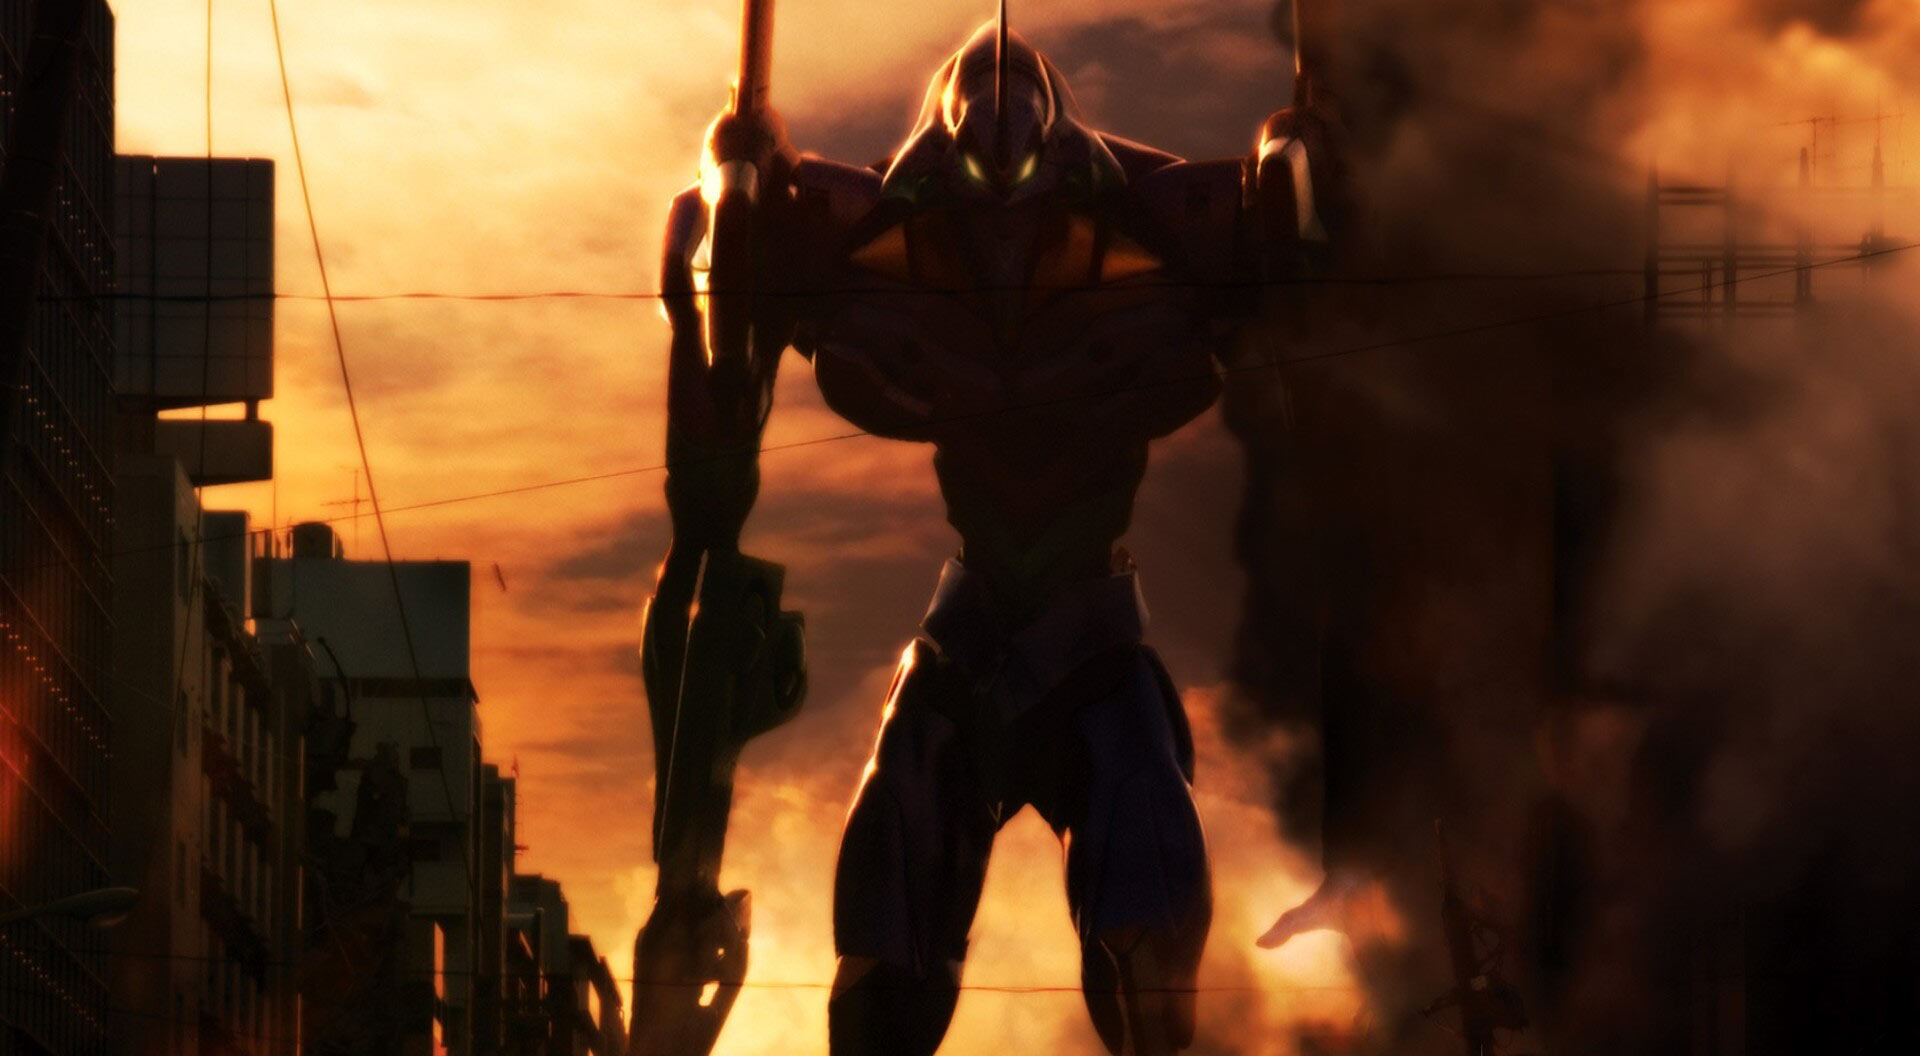 A flying robot in a picture of a sunset in the anime Neon Genesis